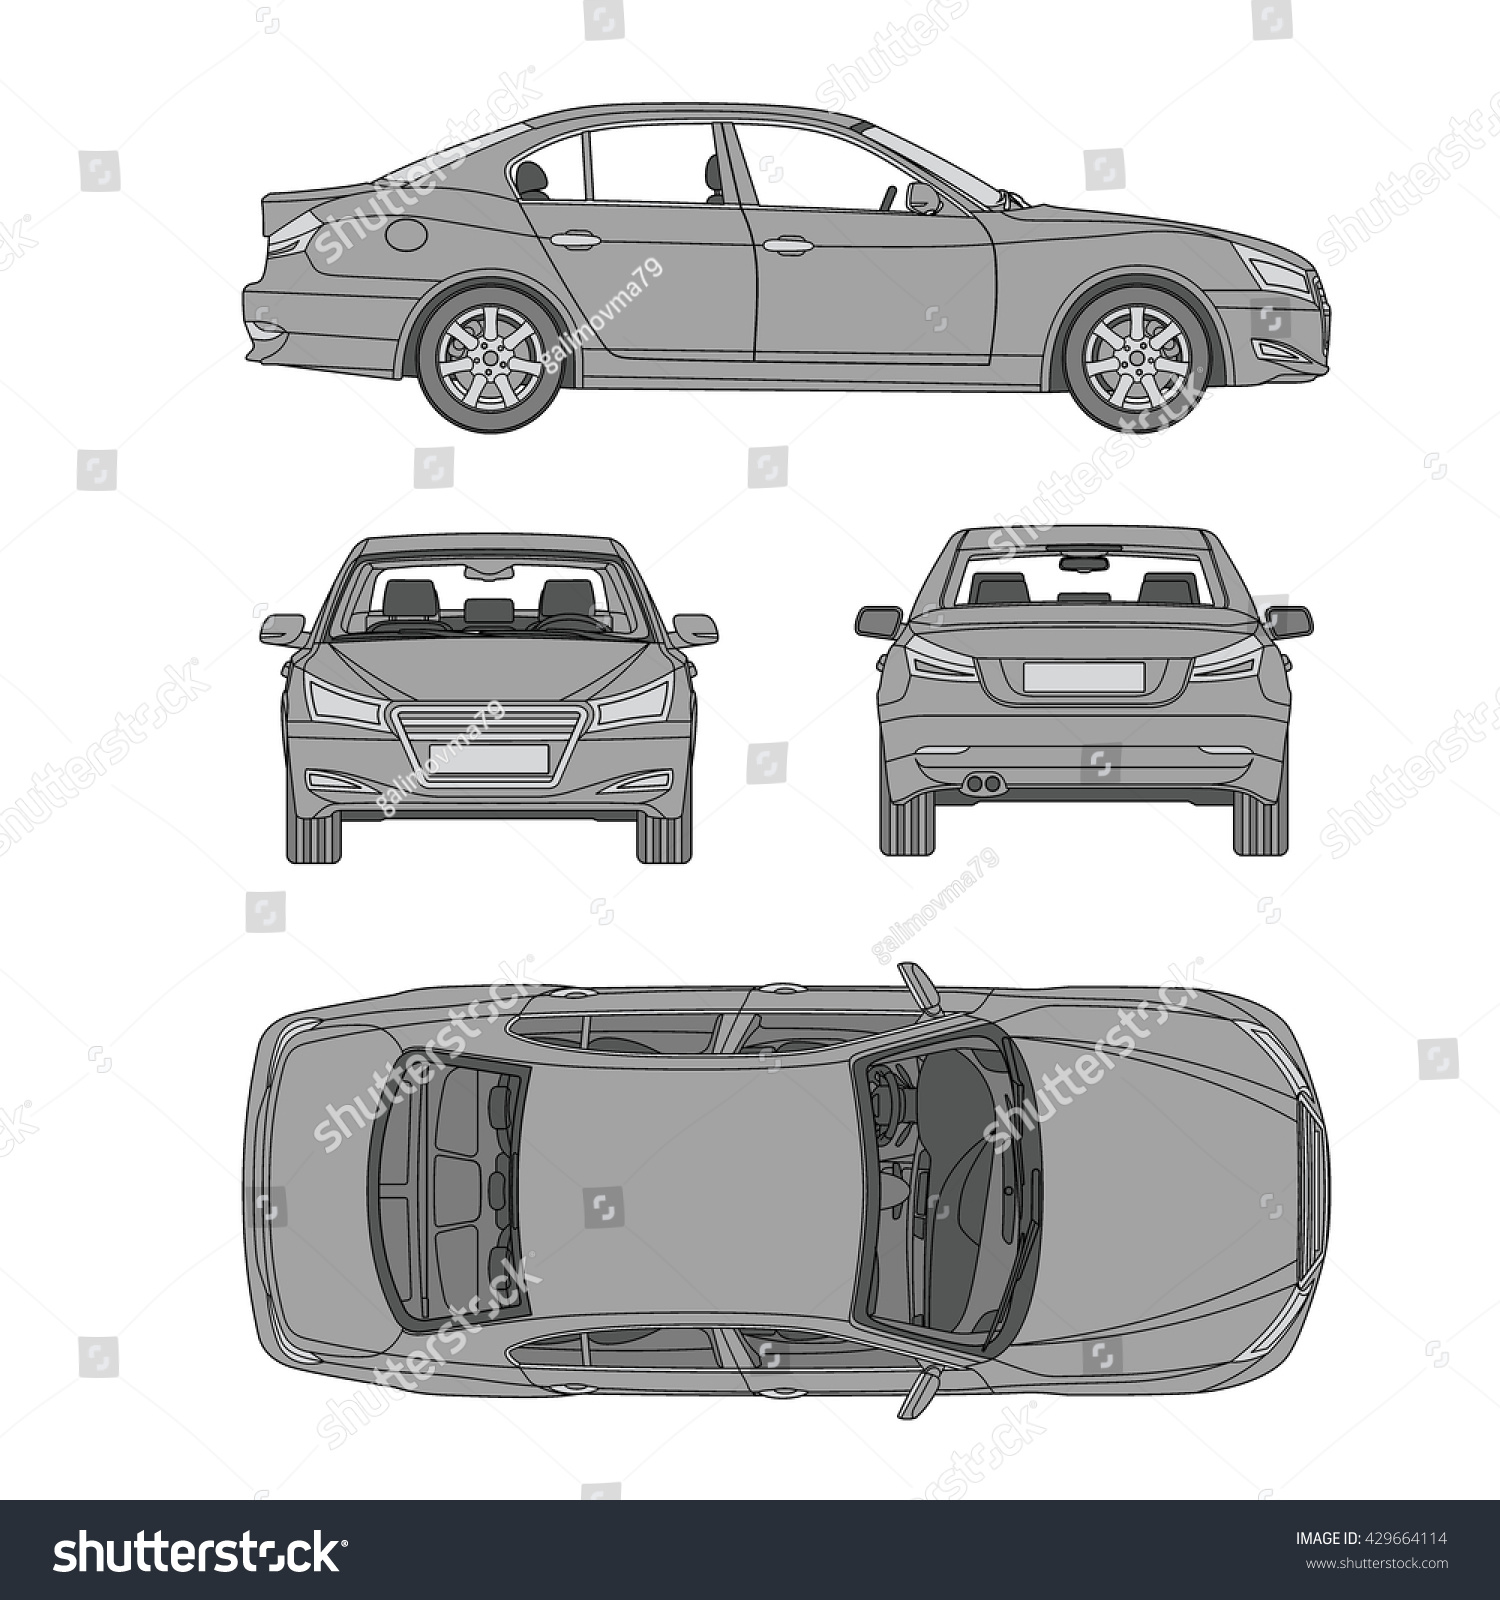 Car Line Draw Insurance Rent Damage Stock Vector (Royalty Free Intended For Truck Condition Report Template